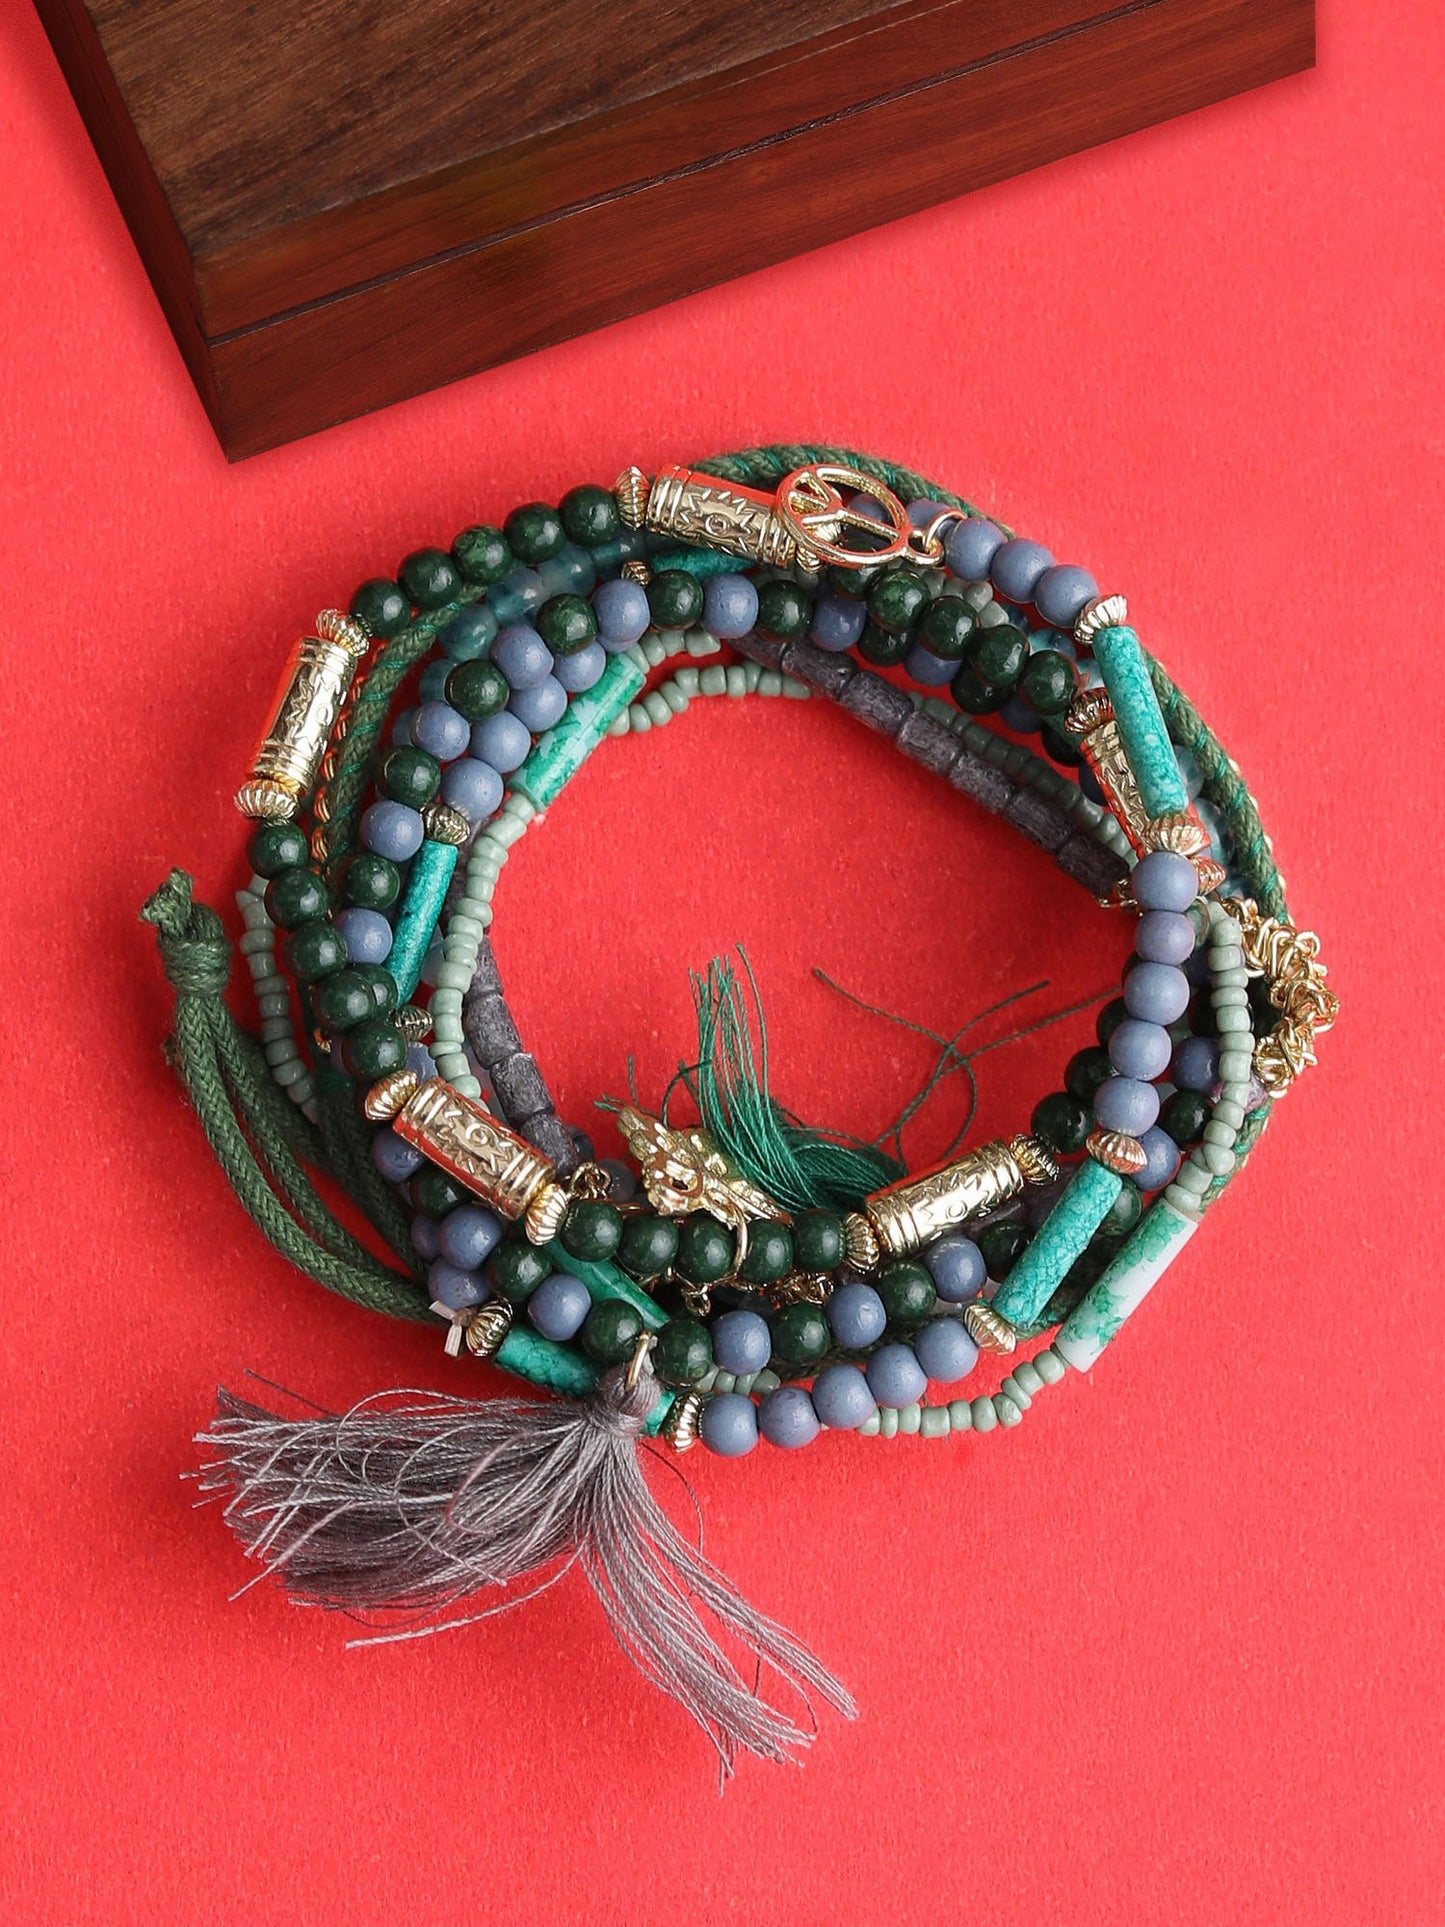 Blueberry set of 8 green and grey toned bracelets